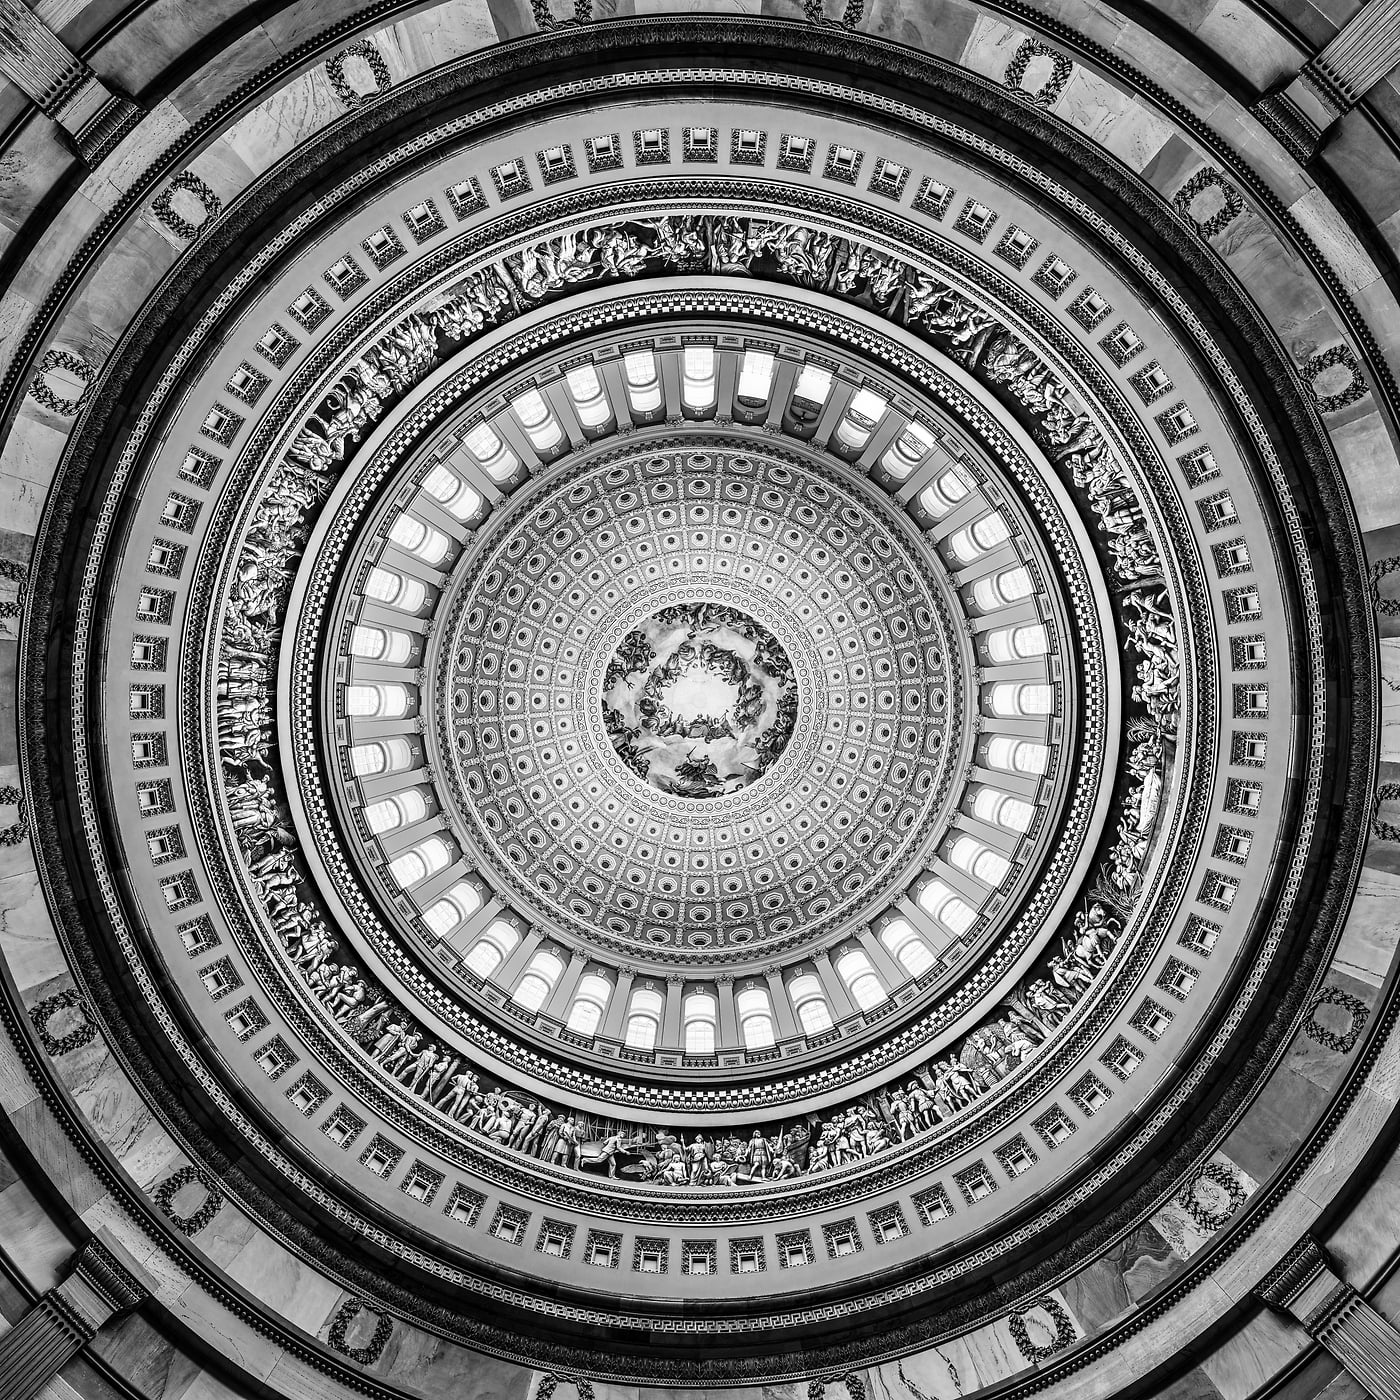 863 megapixels! A very high resolution, large-format VAST photo print of the U.S. Capitol Building Rotunda; artistic photograph created by Tim Lo Monaco in the U.S. Capitol Building, Washington, D.C.